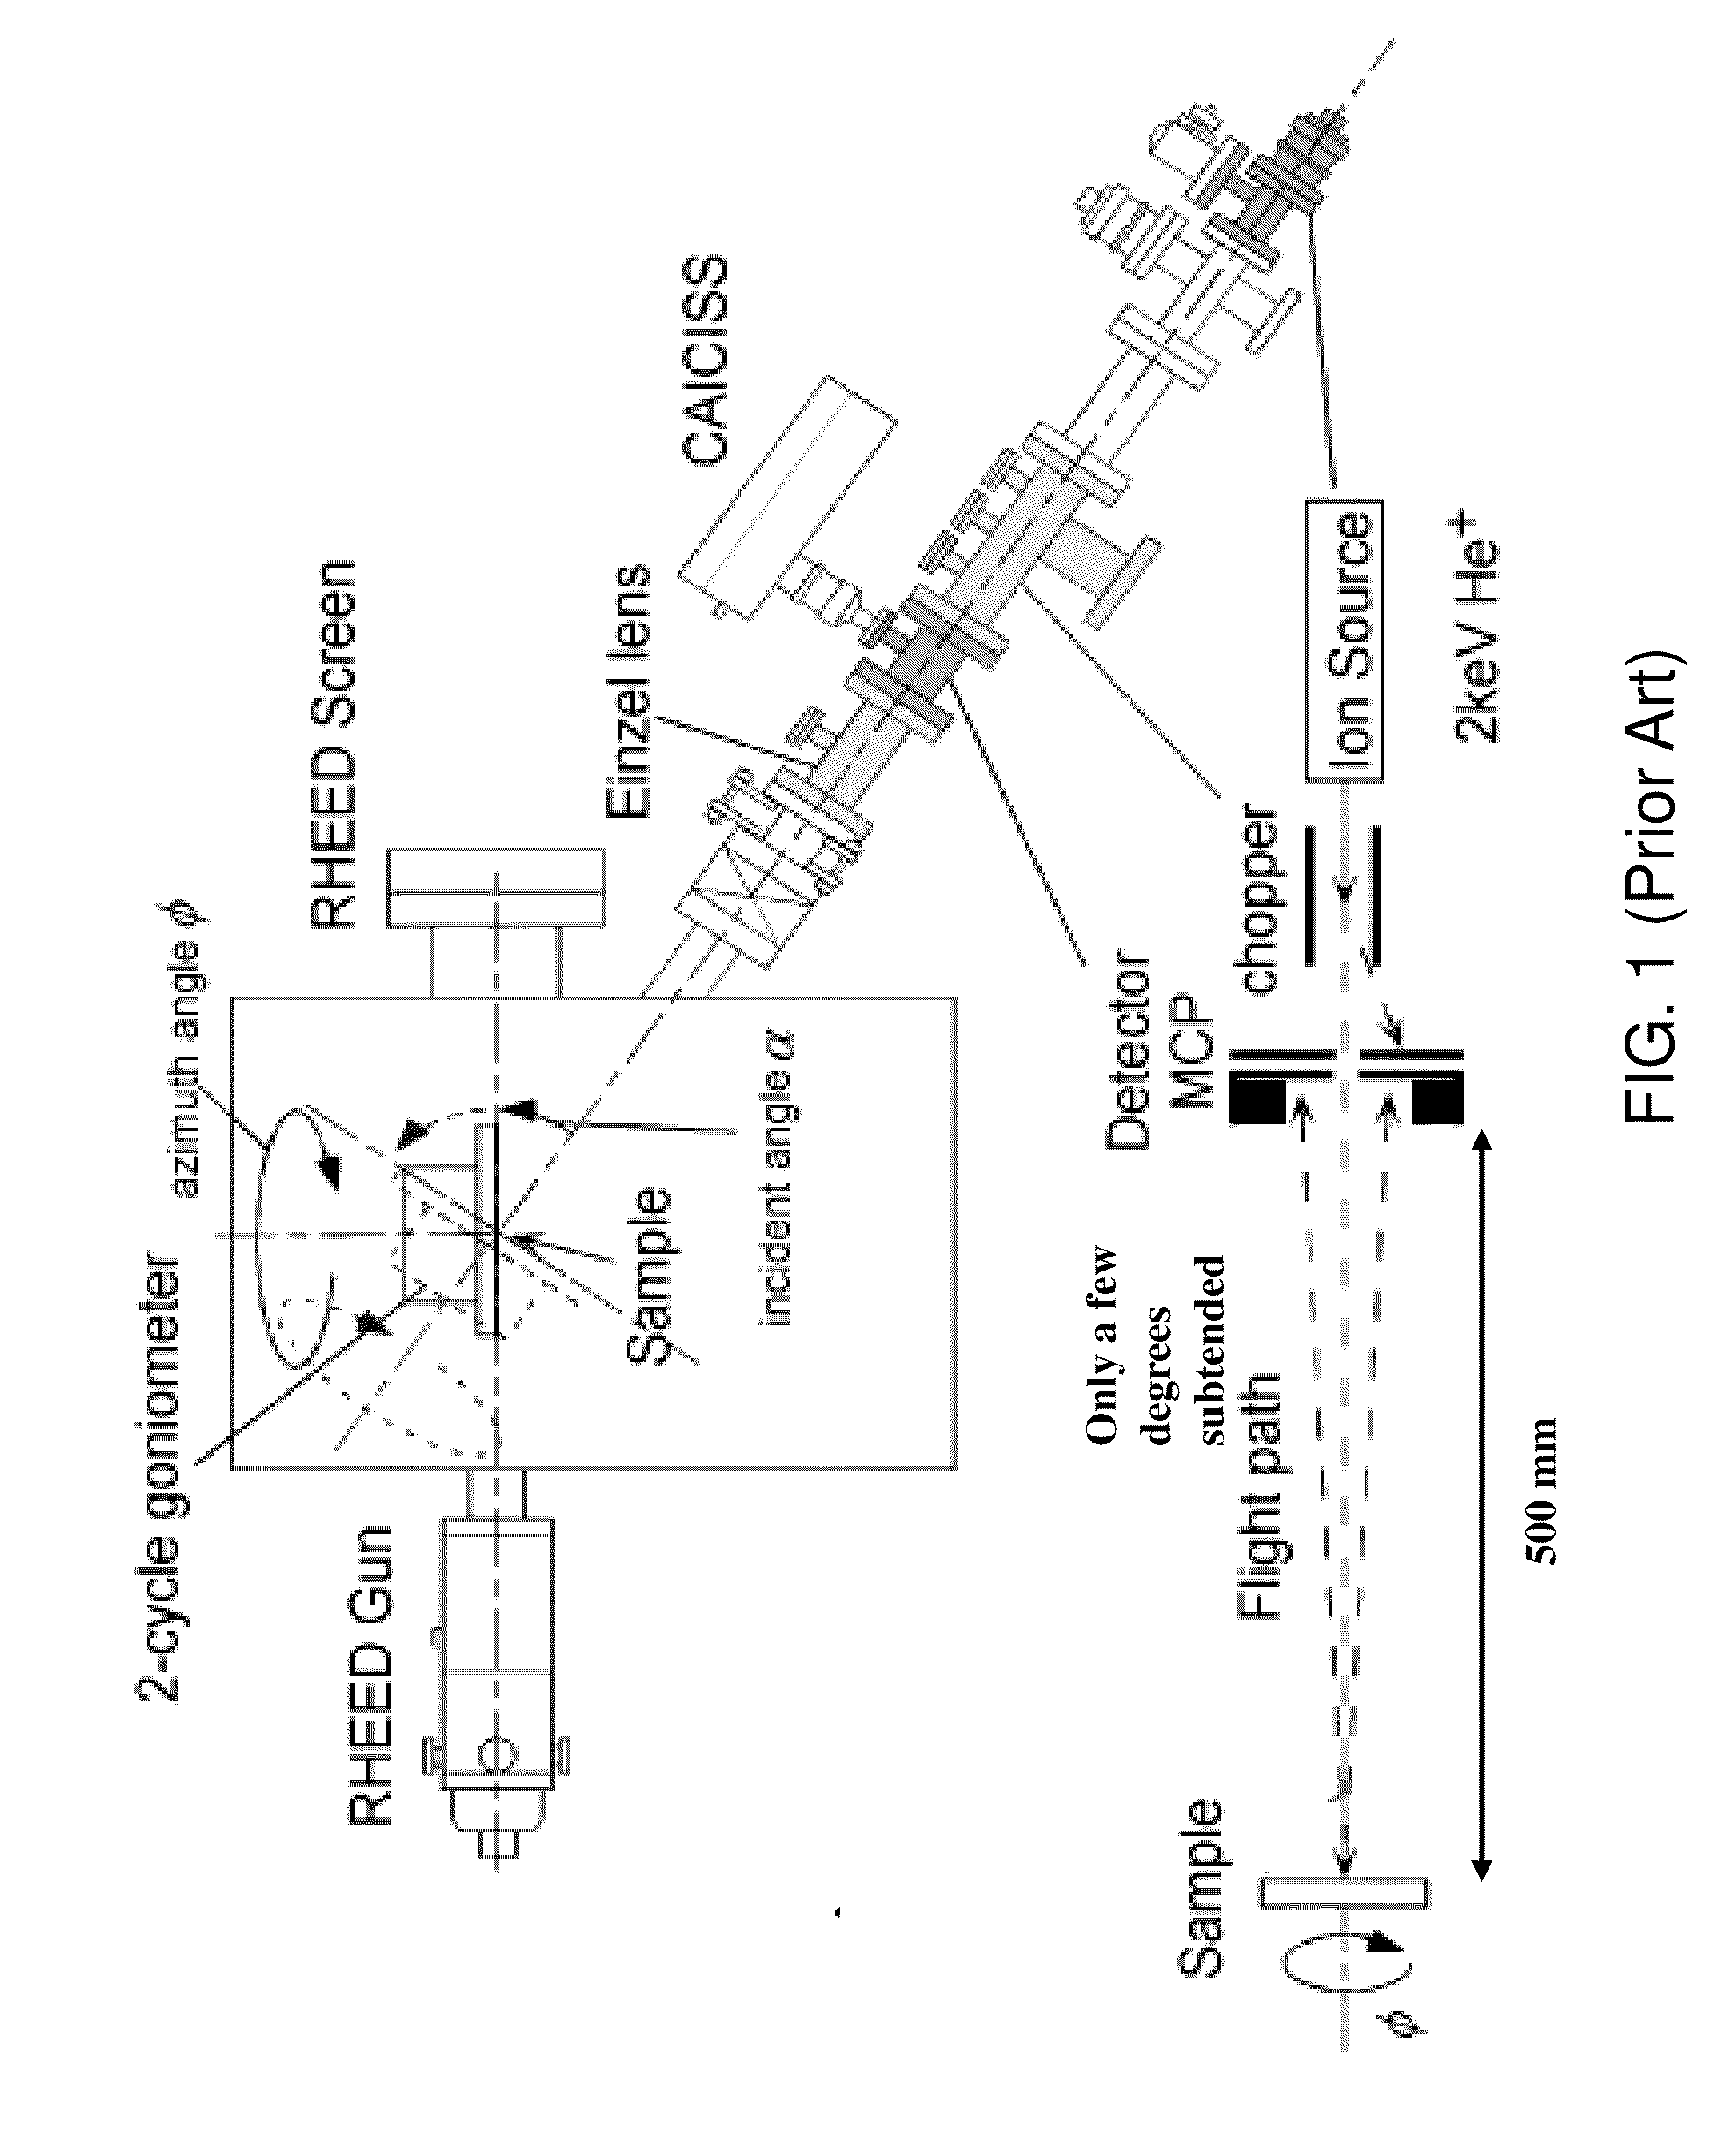 Time-of-flight spectrometry and spectroscopy of surfaces